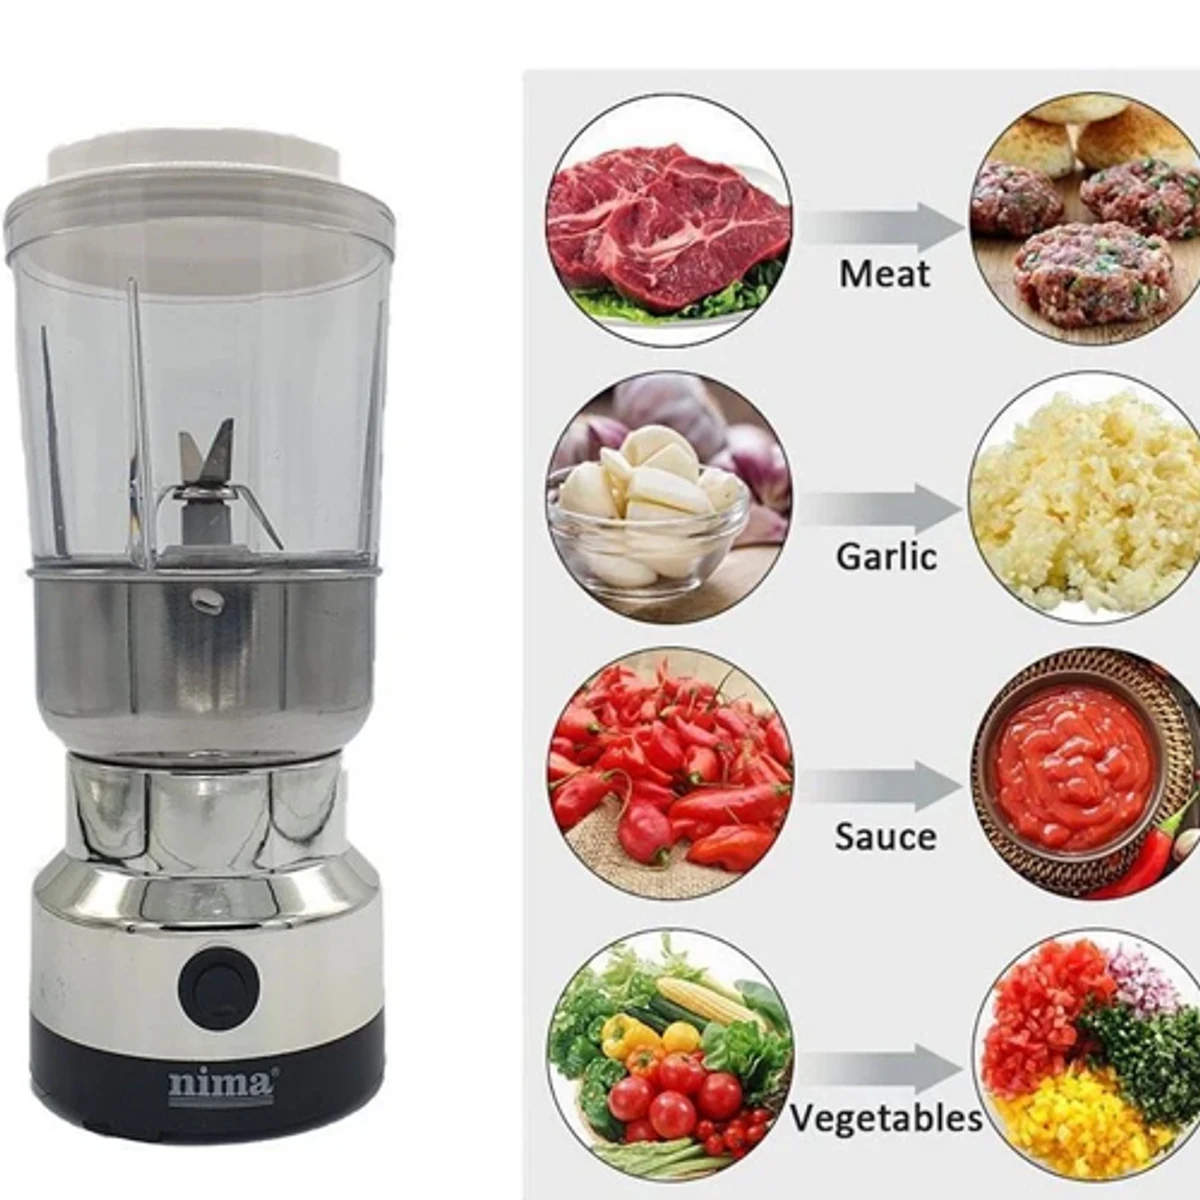 Nima 2 In 1 Coffee And Juice Electric Grinder